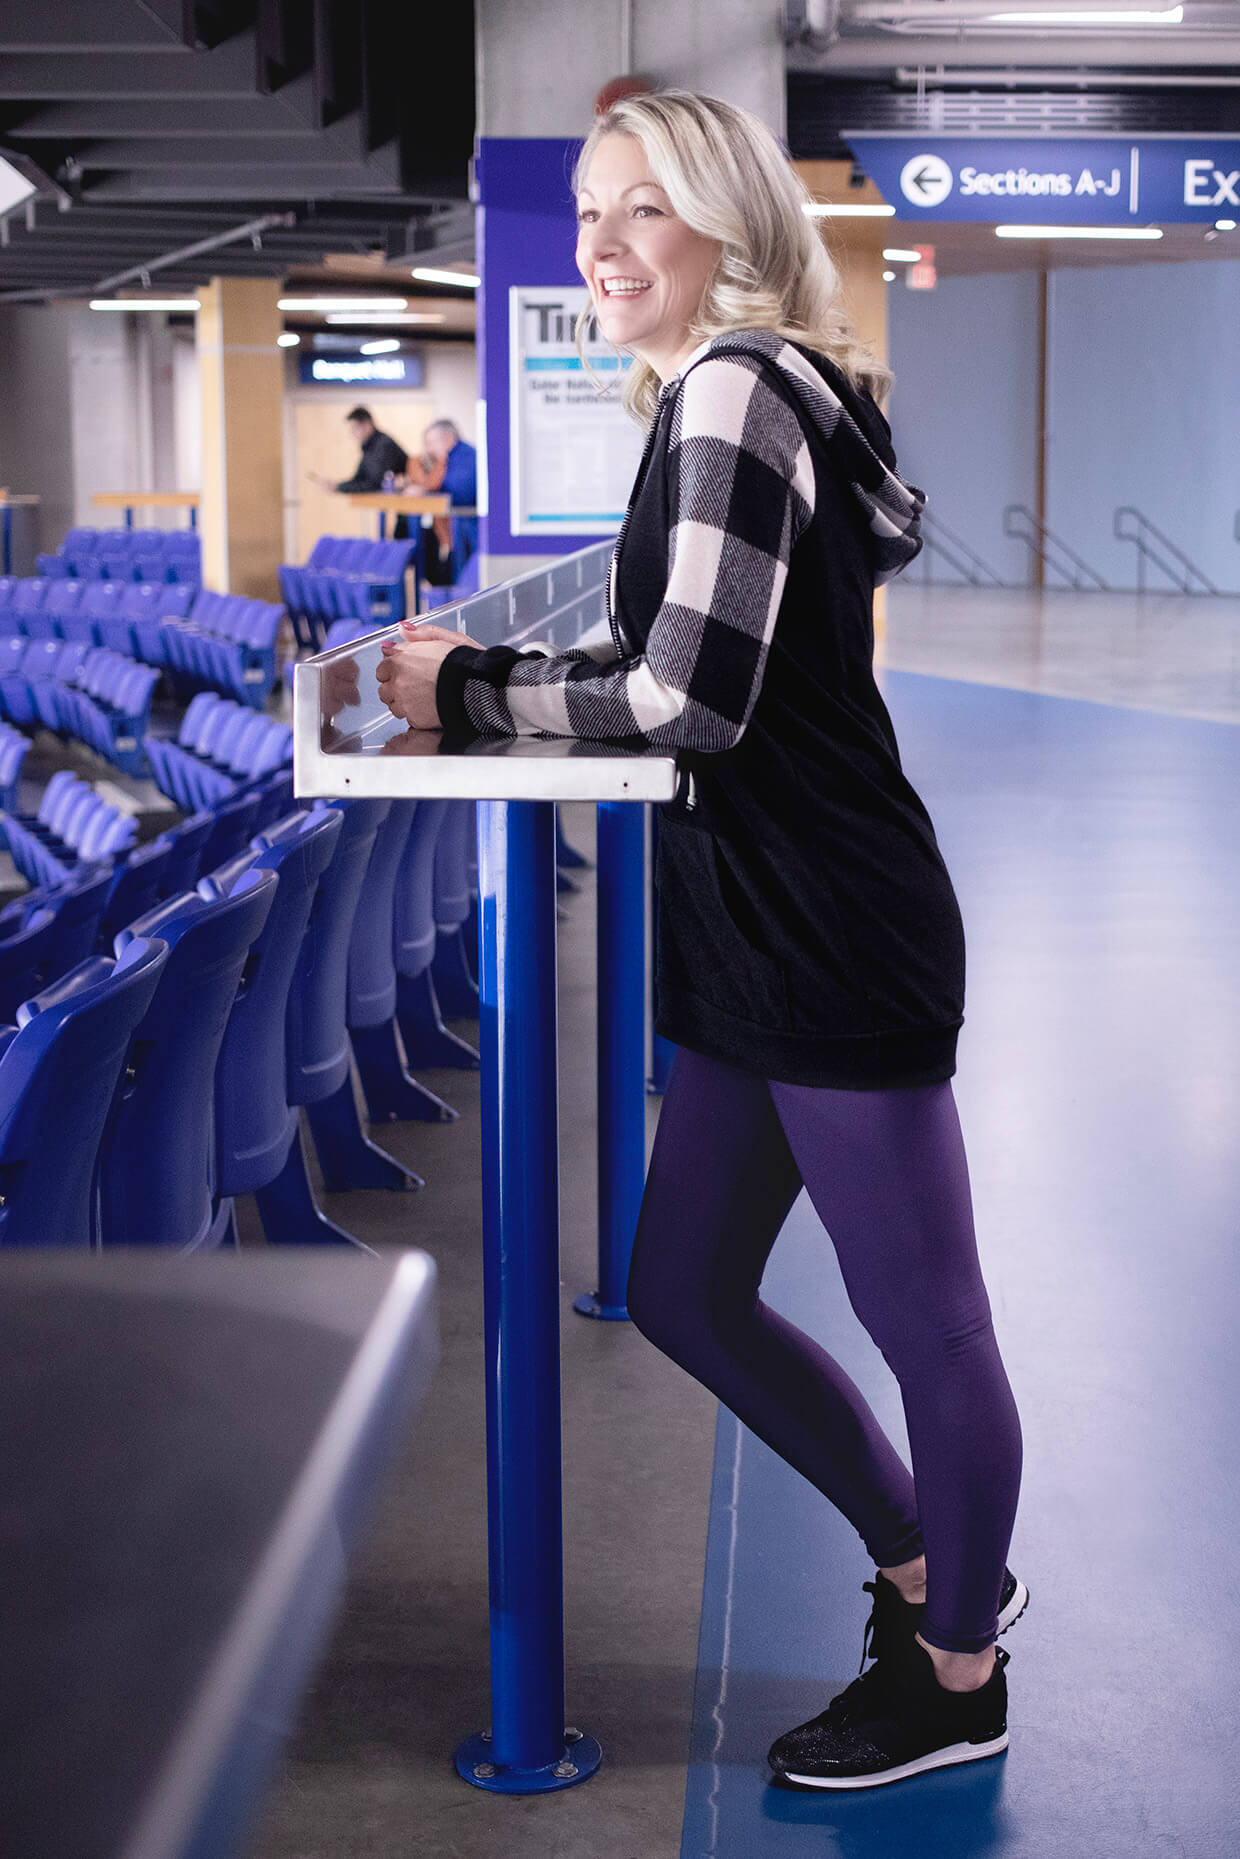 Silver Icing Product Feature [Video]: How to Stay Warm and Stylish at the Hockey Rink